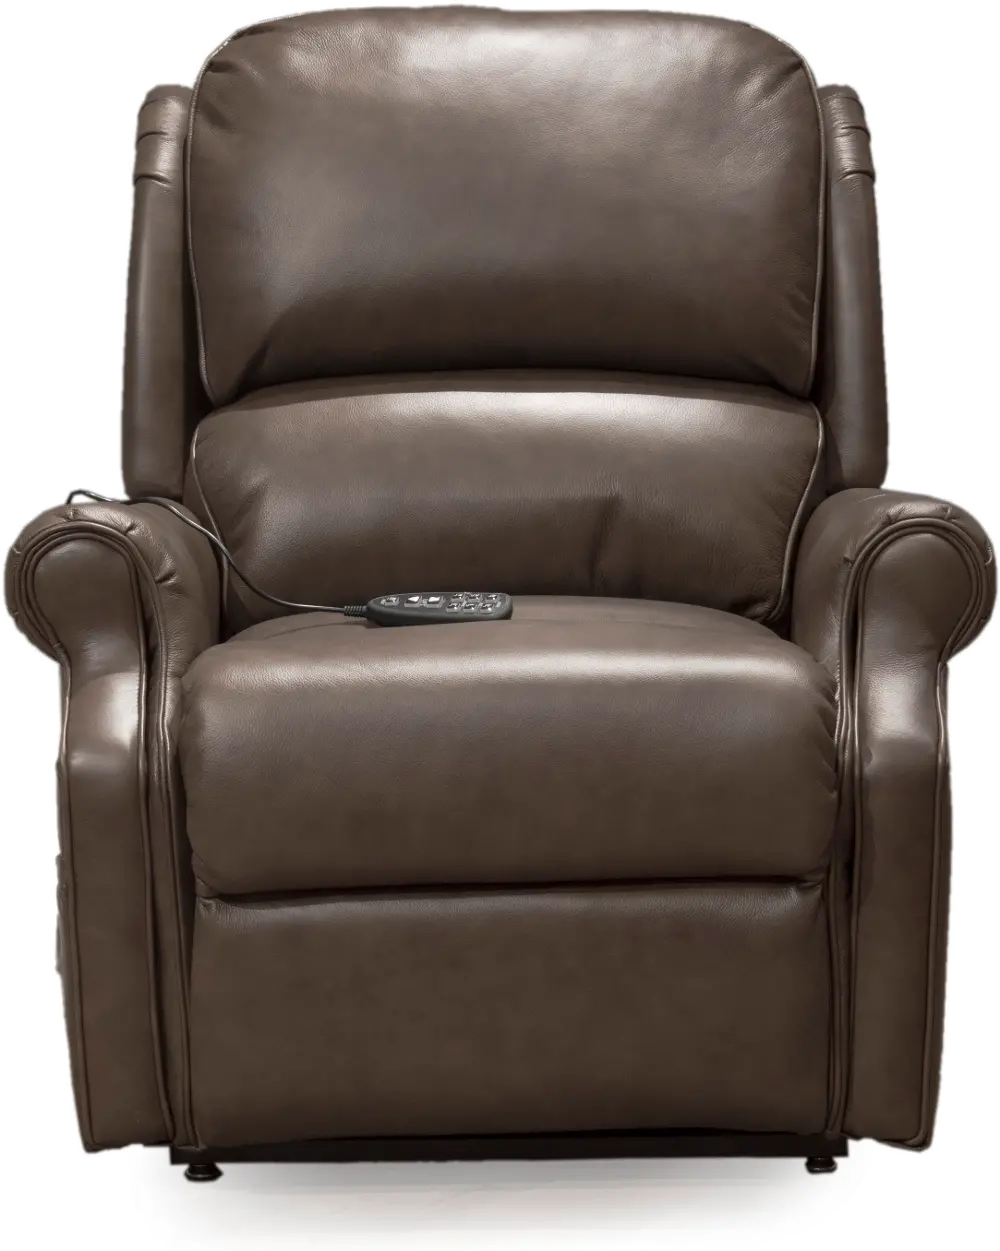 Caramel Brown Leather-Match Power Reclining Lift Chair - Palermo-1